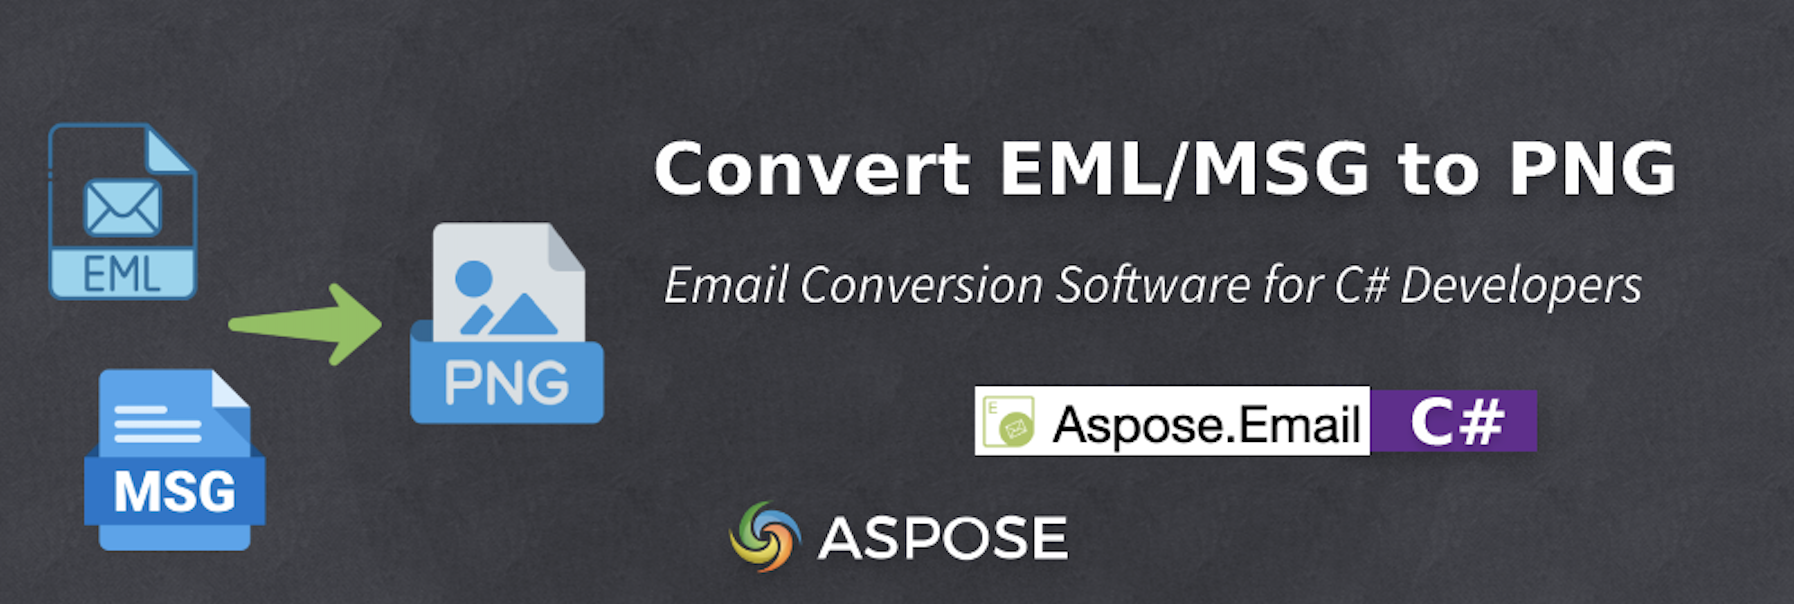 Email Conversion Software for C# Developers - EML to PNG